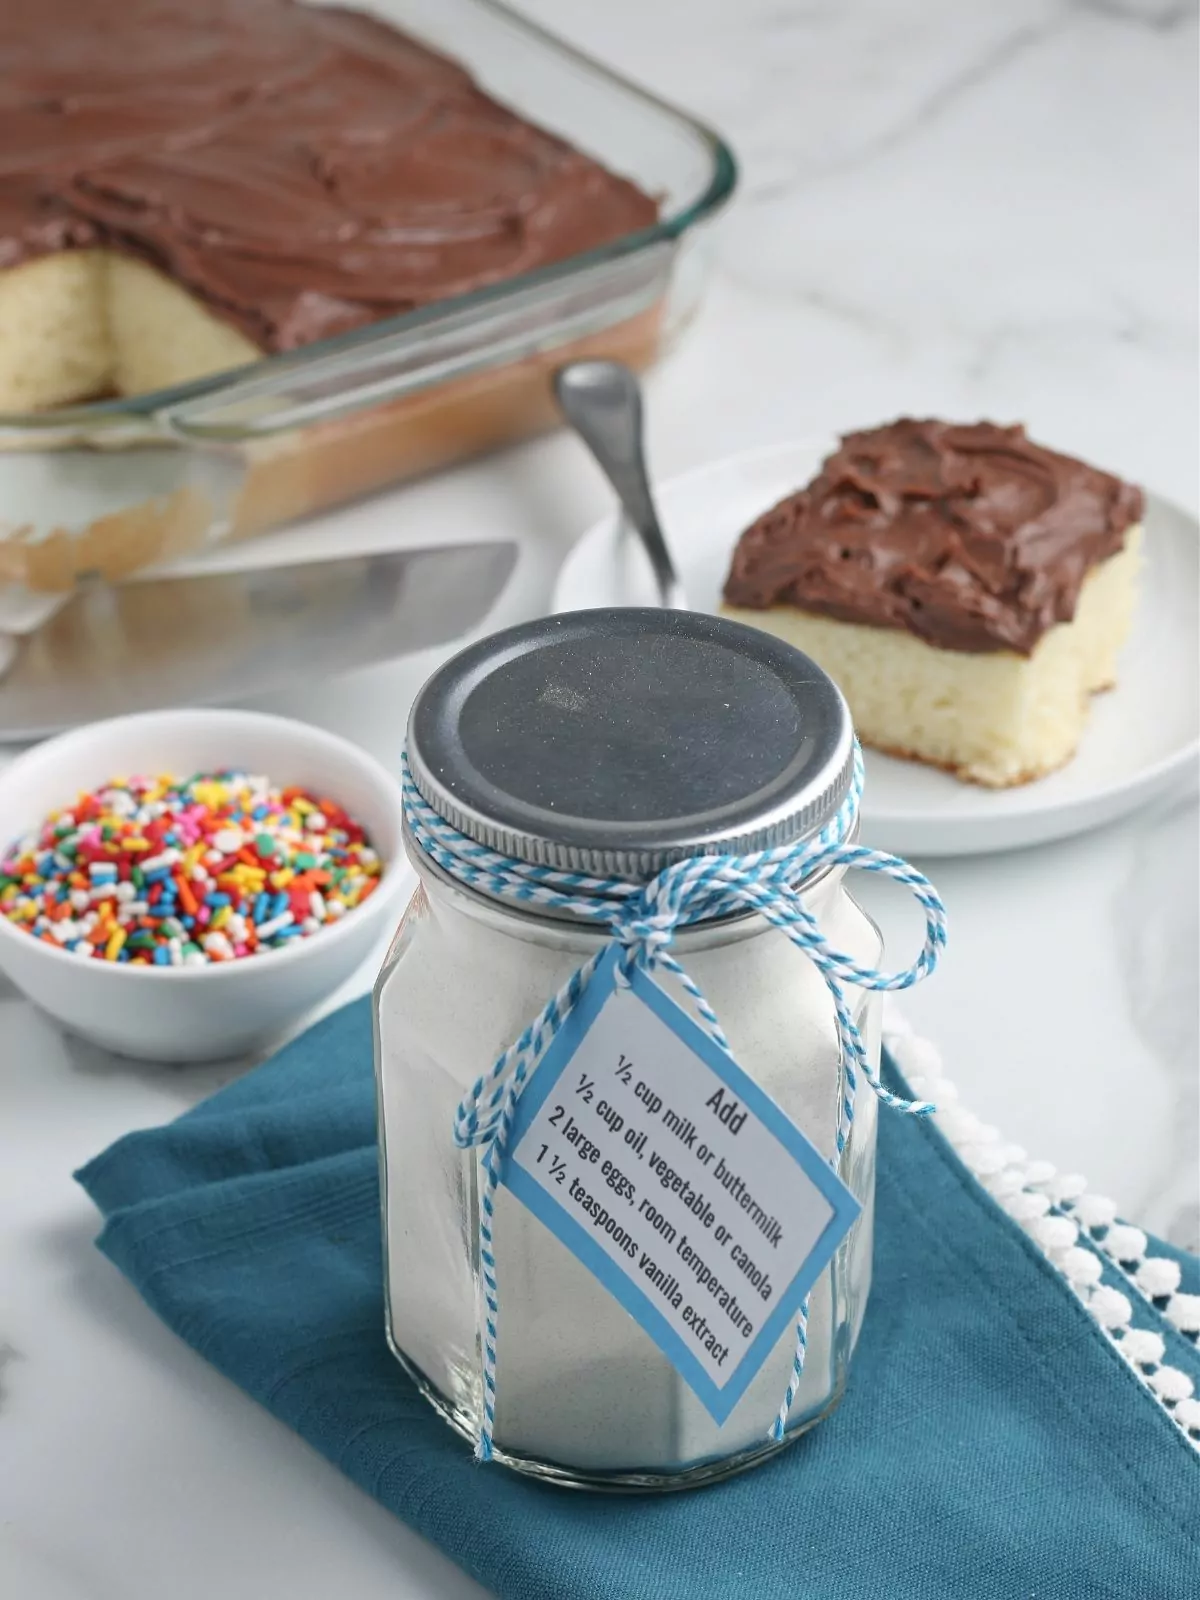 cake mix in a mason jar with homemade cake baked in background.